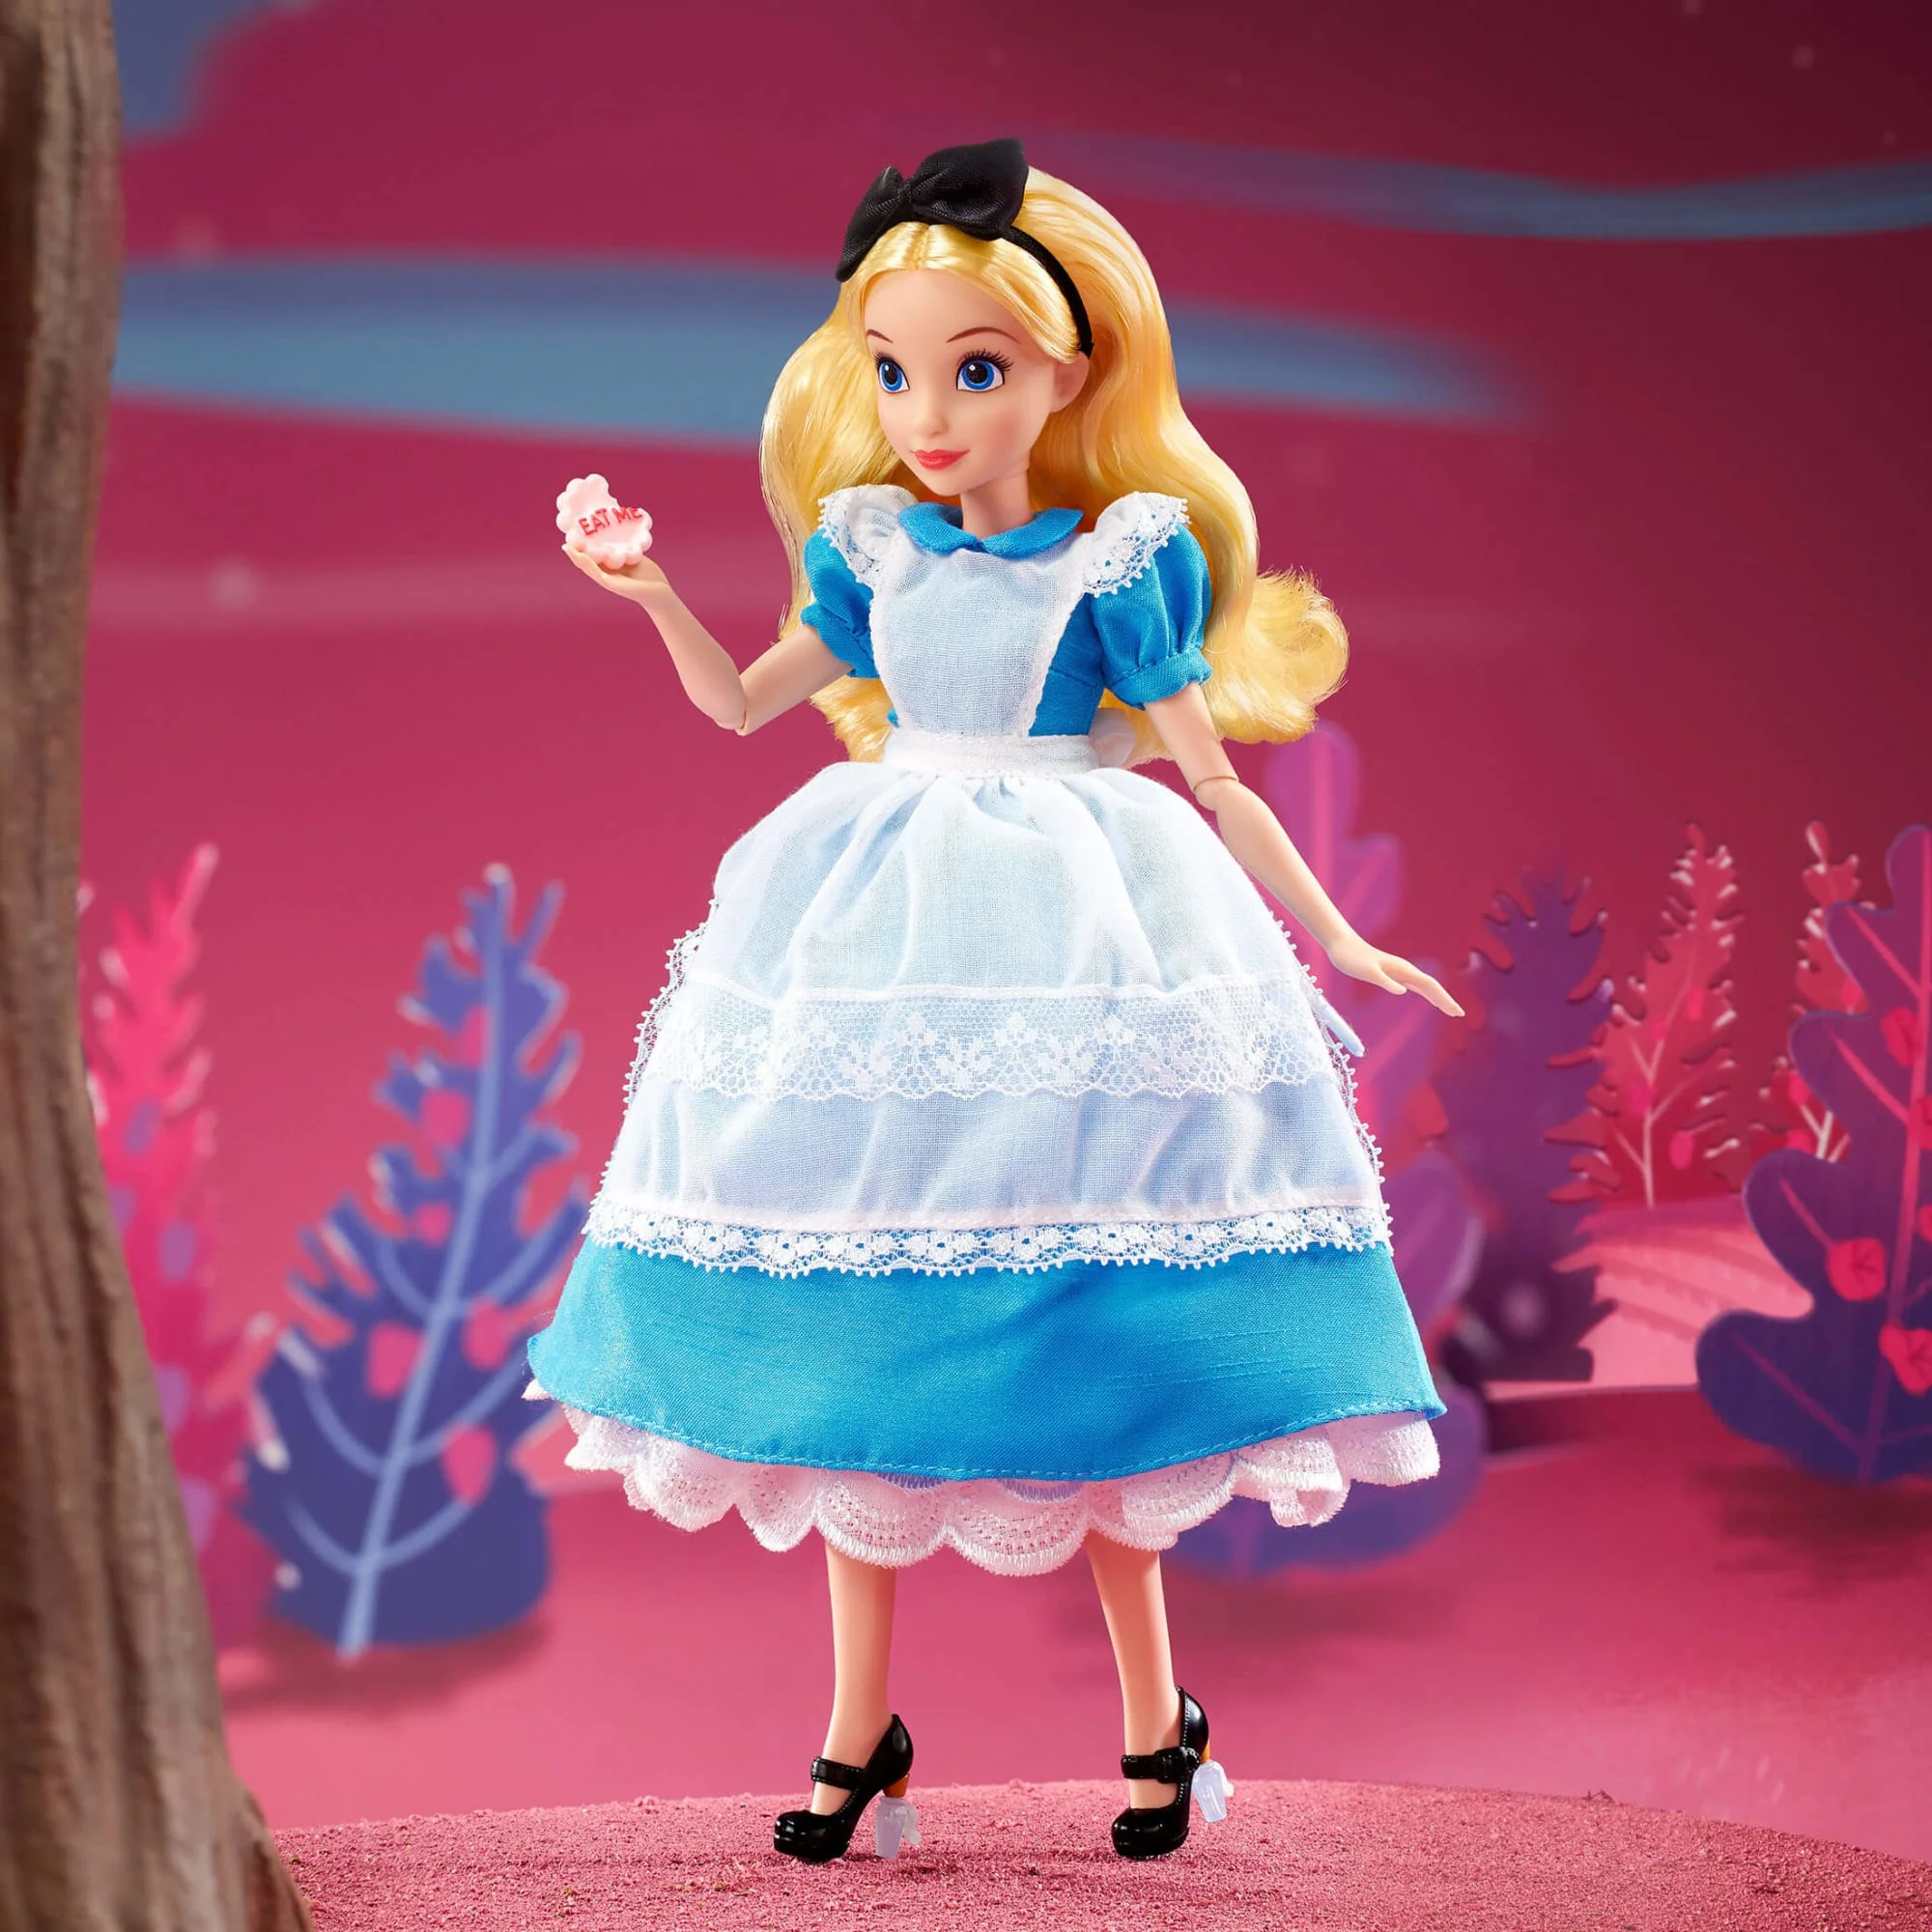 Alice in Wonderland Doll Collection, I'm so happy about my …